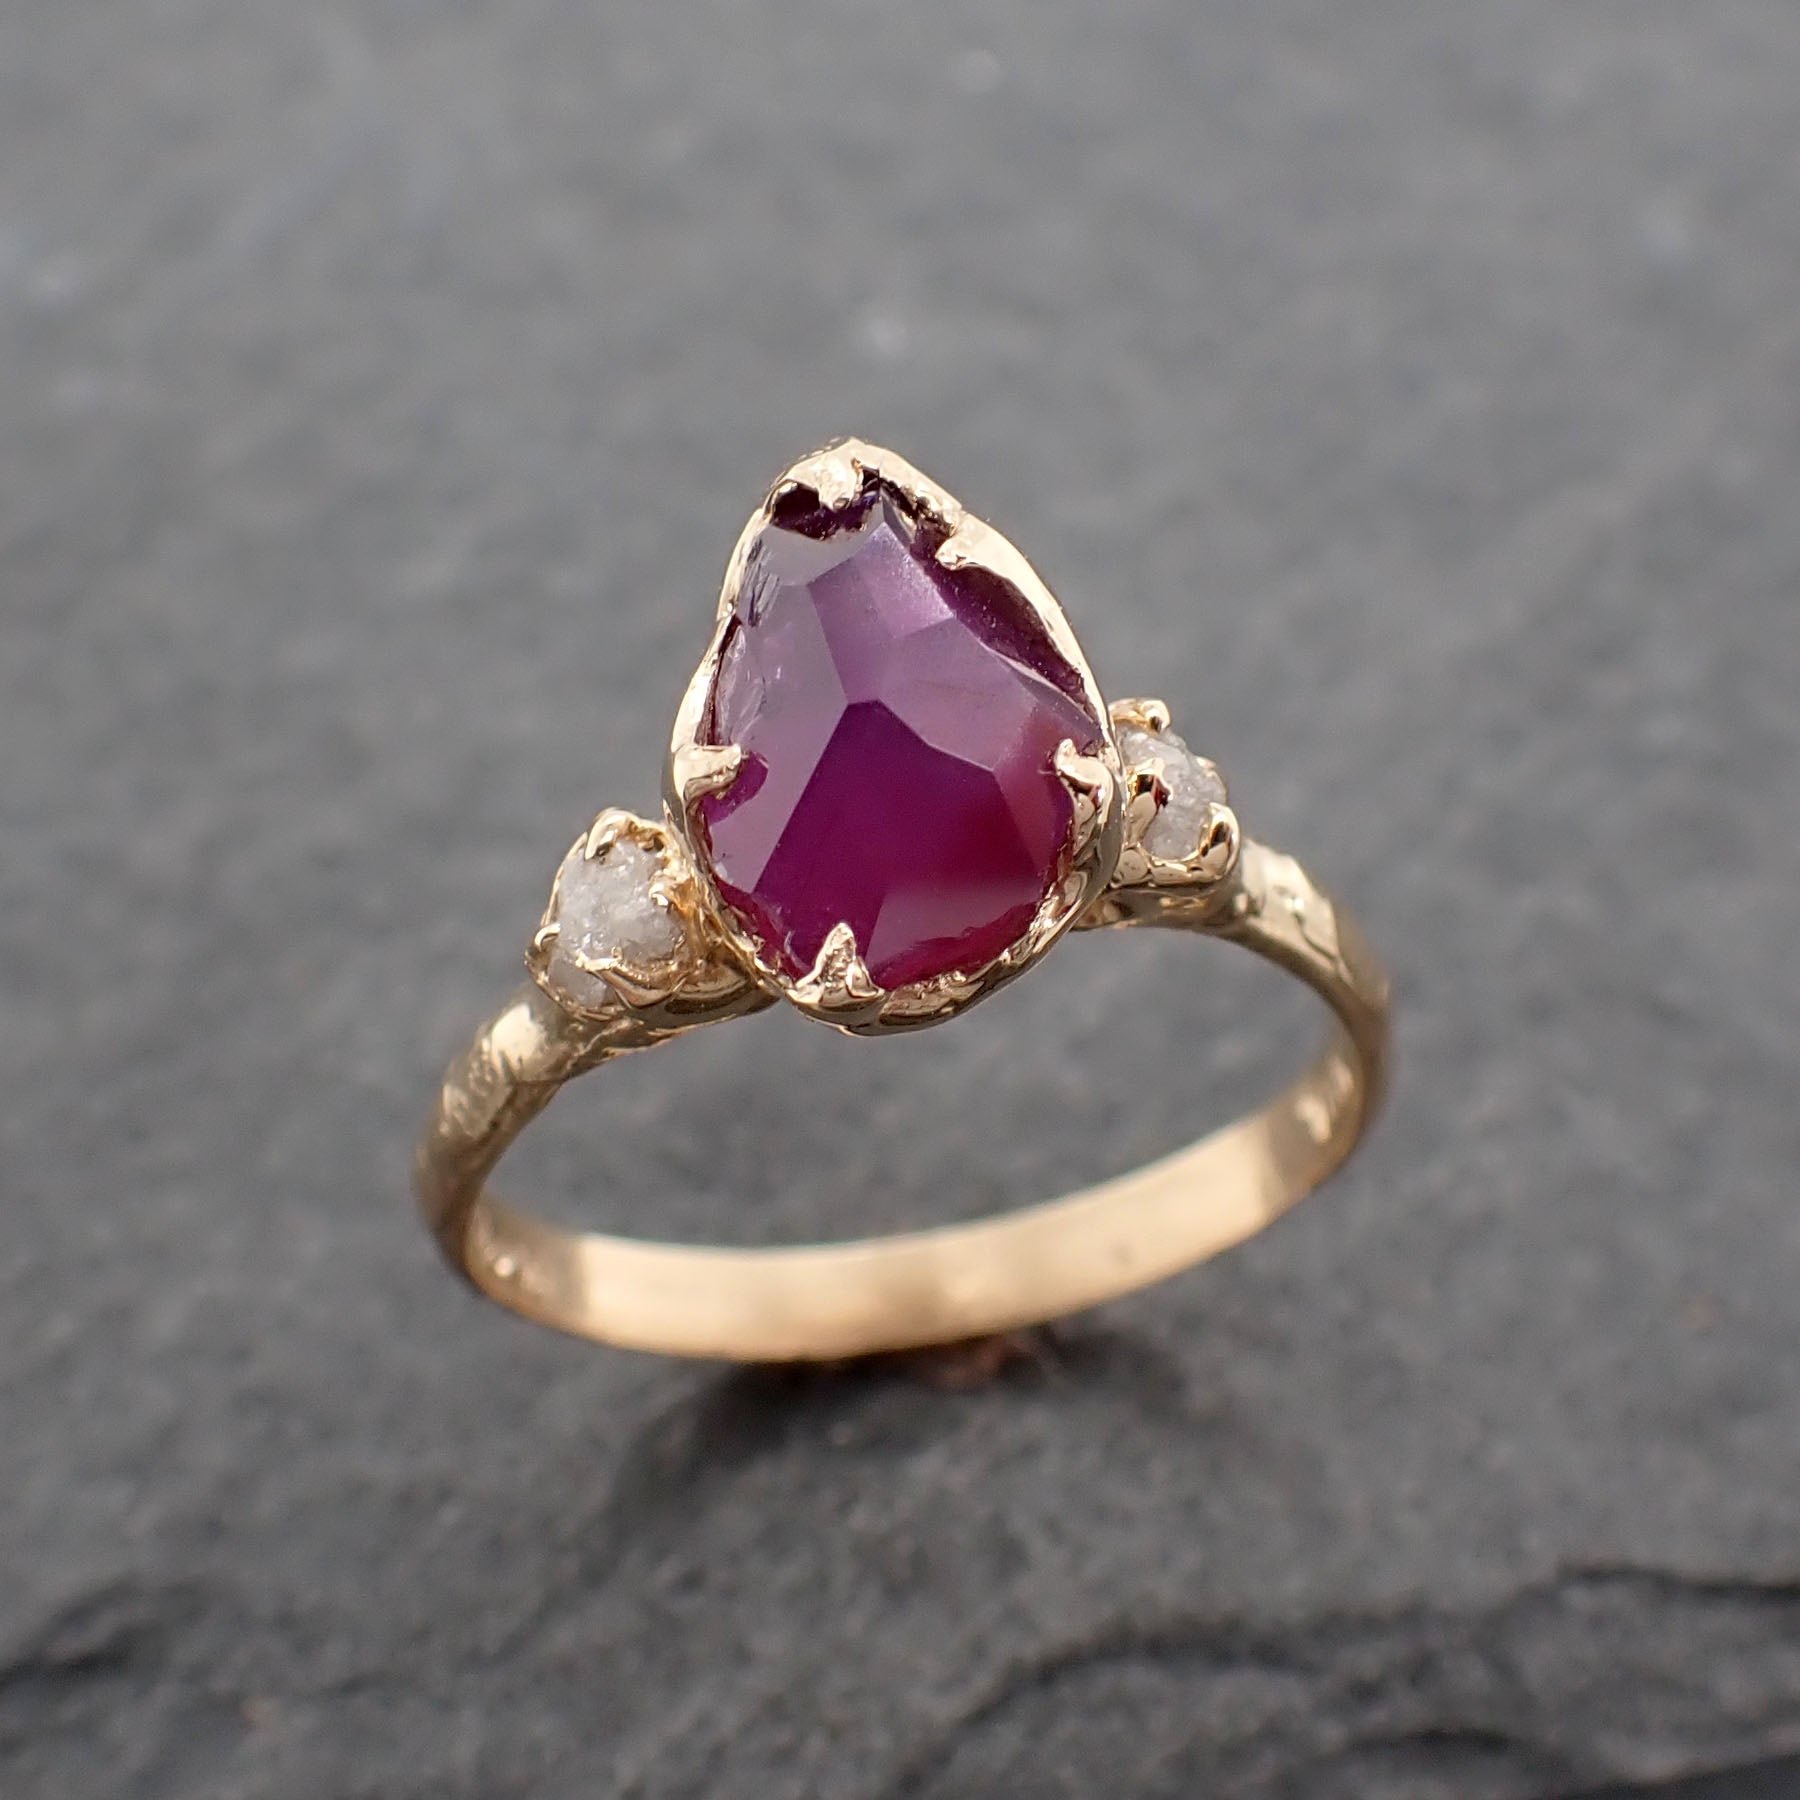 Partially faceted sapphire gemstone Raw Rough Diamond 18k Yellow Gold Engagement ring multi stone 2437